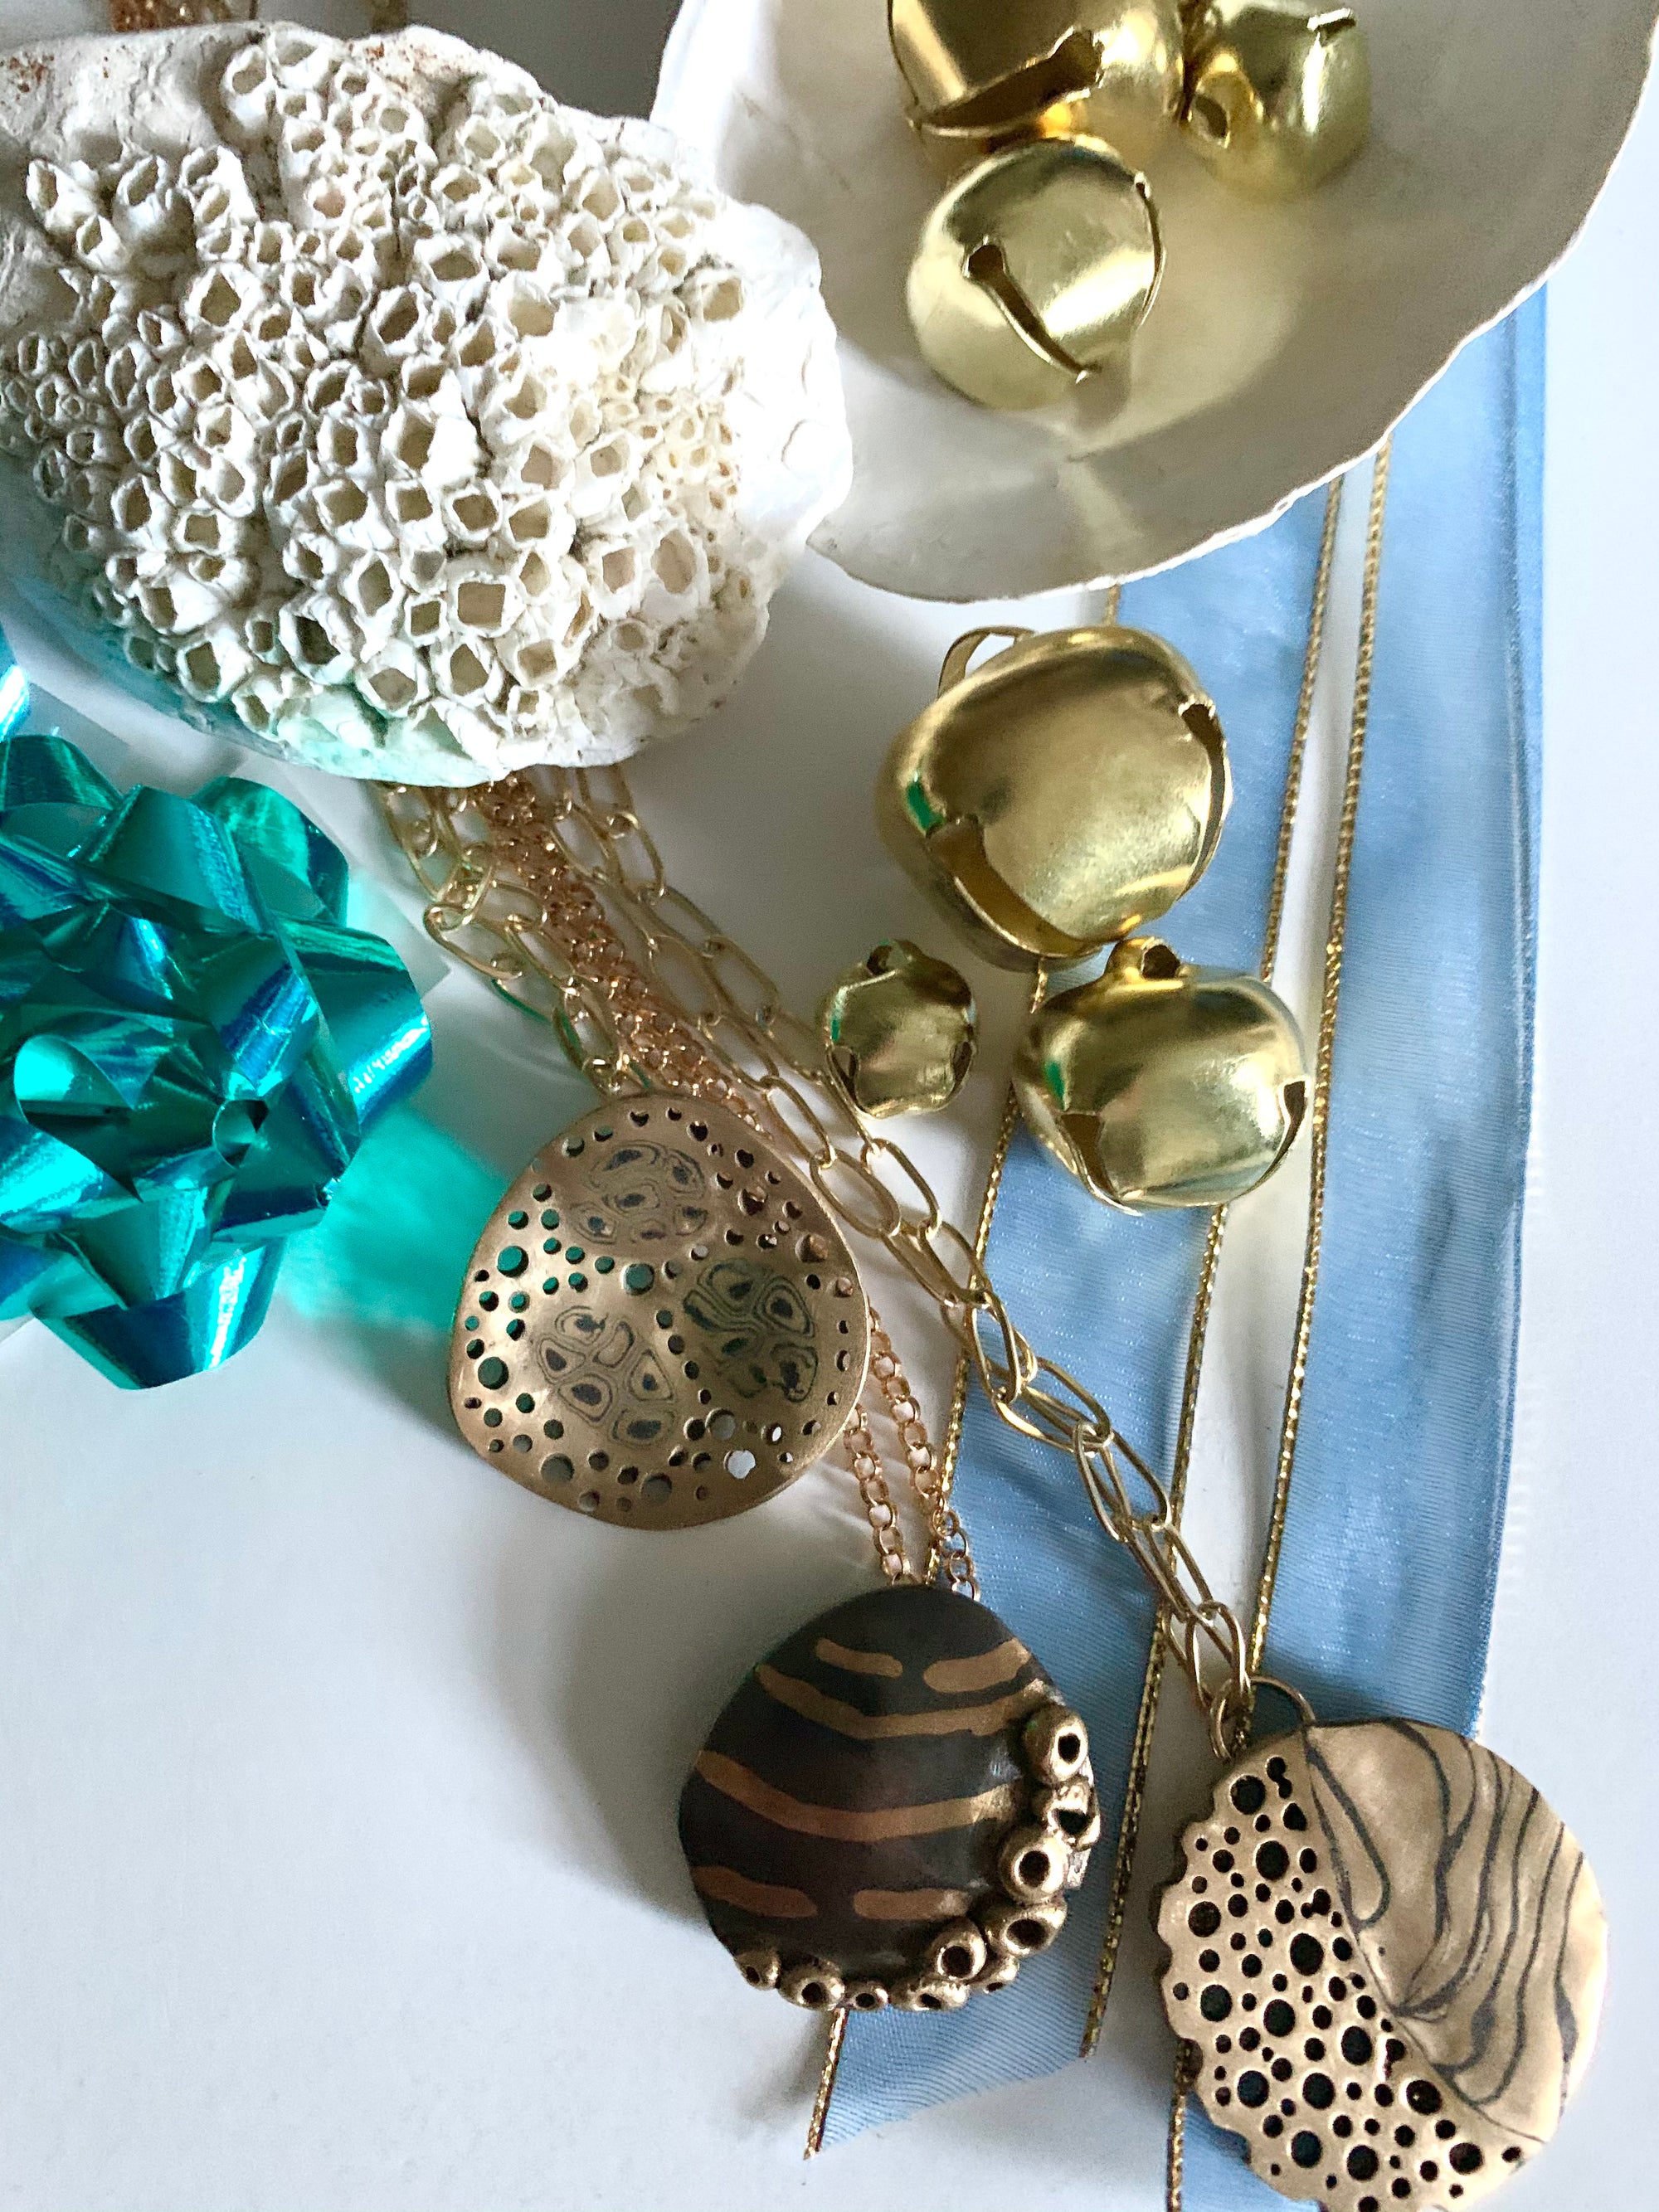 Three ocean inspired art jewelry necklaces for the holiday season